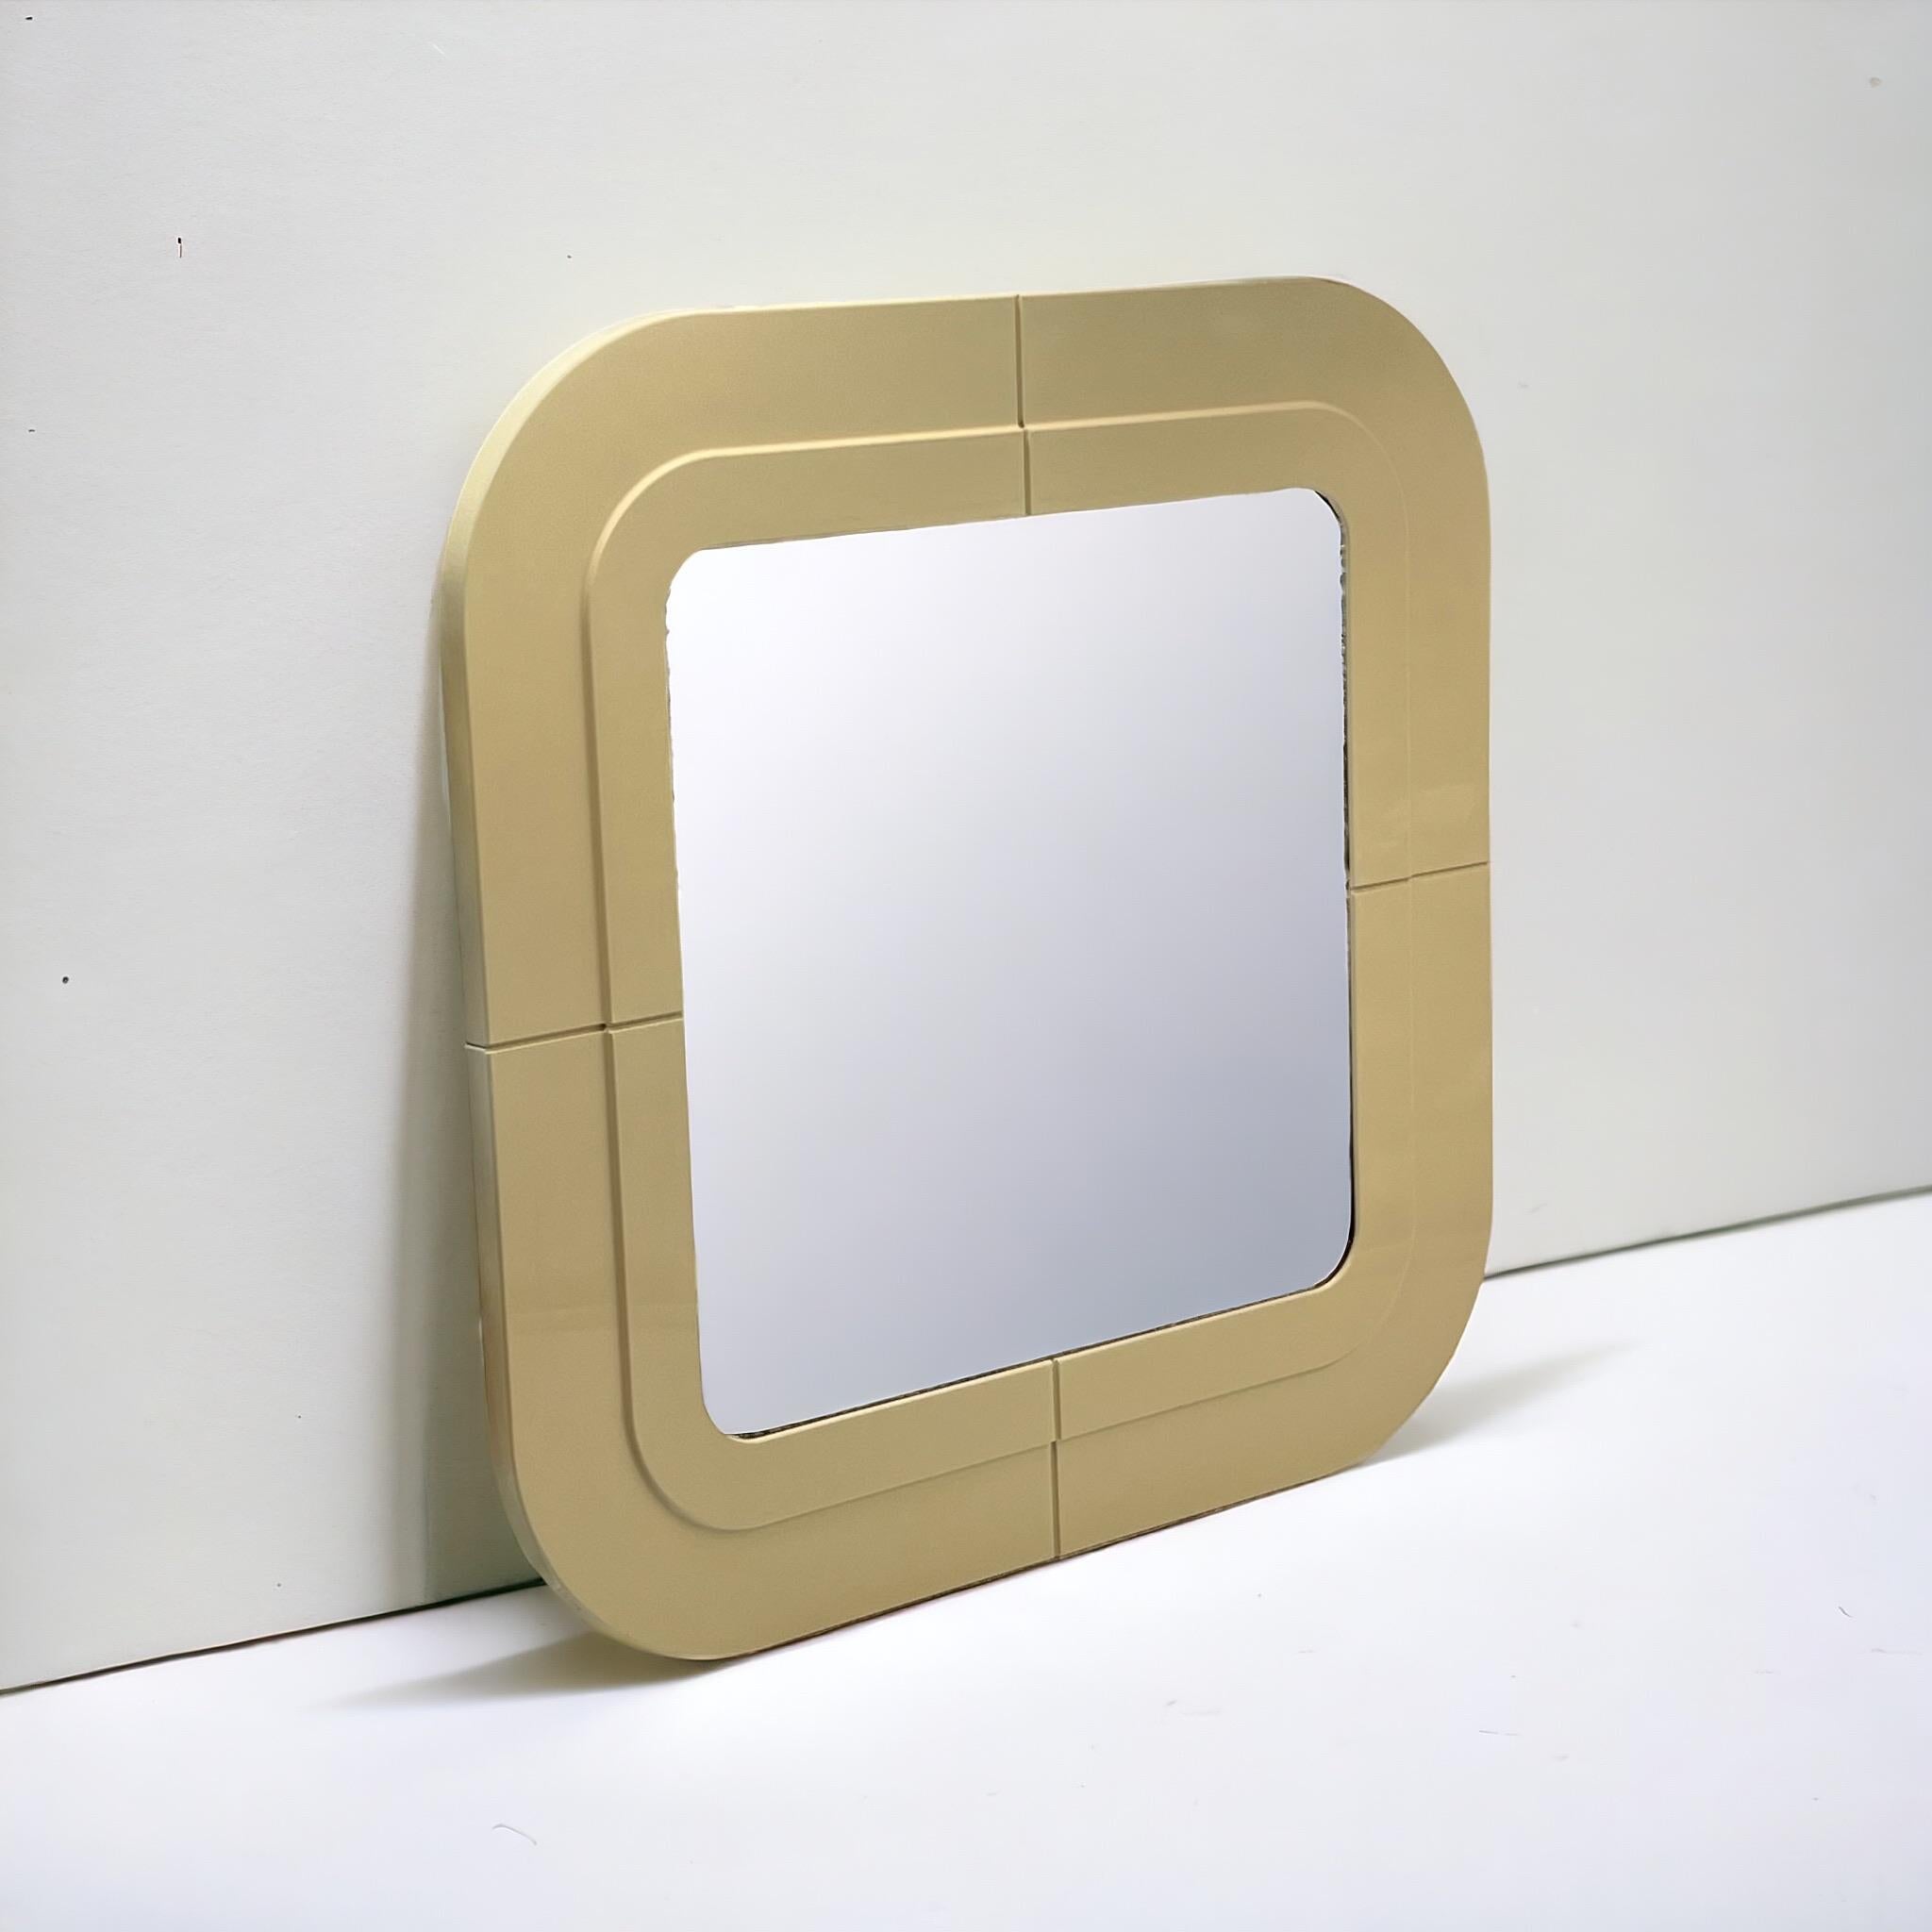 Vintage Wall Mirror by Anna Castelli Ferrieri for Kartell - 1960s In Good Condition For Sale In San Benedetto Del Tronto, IT